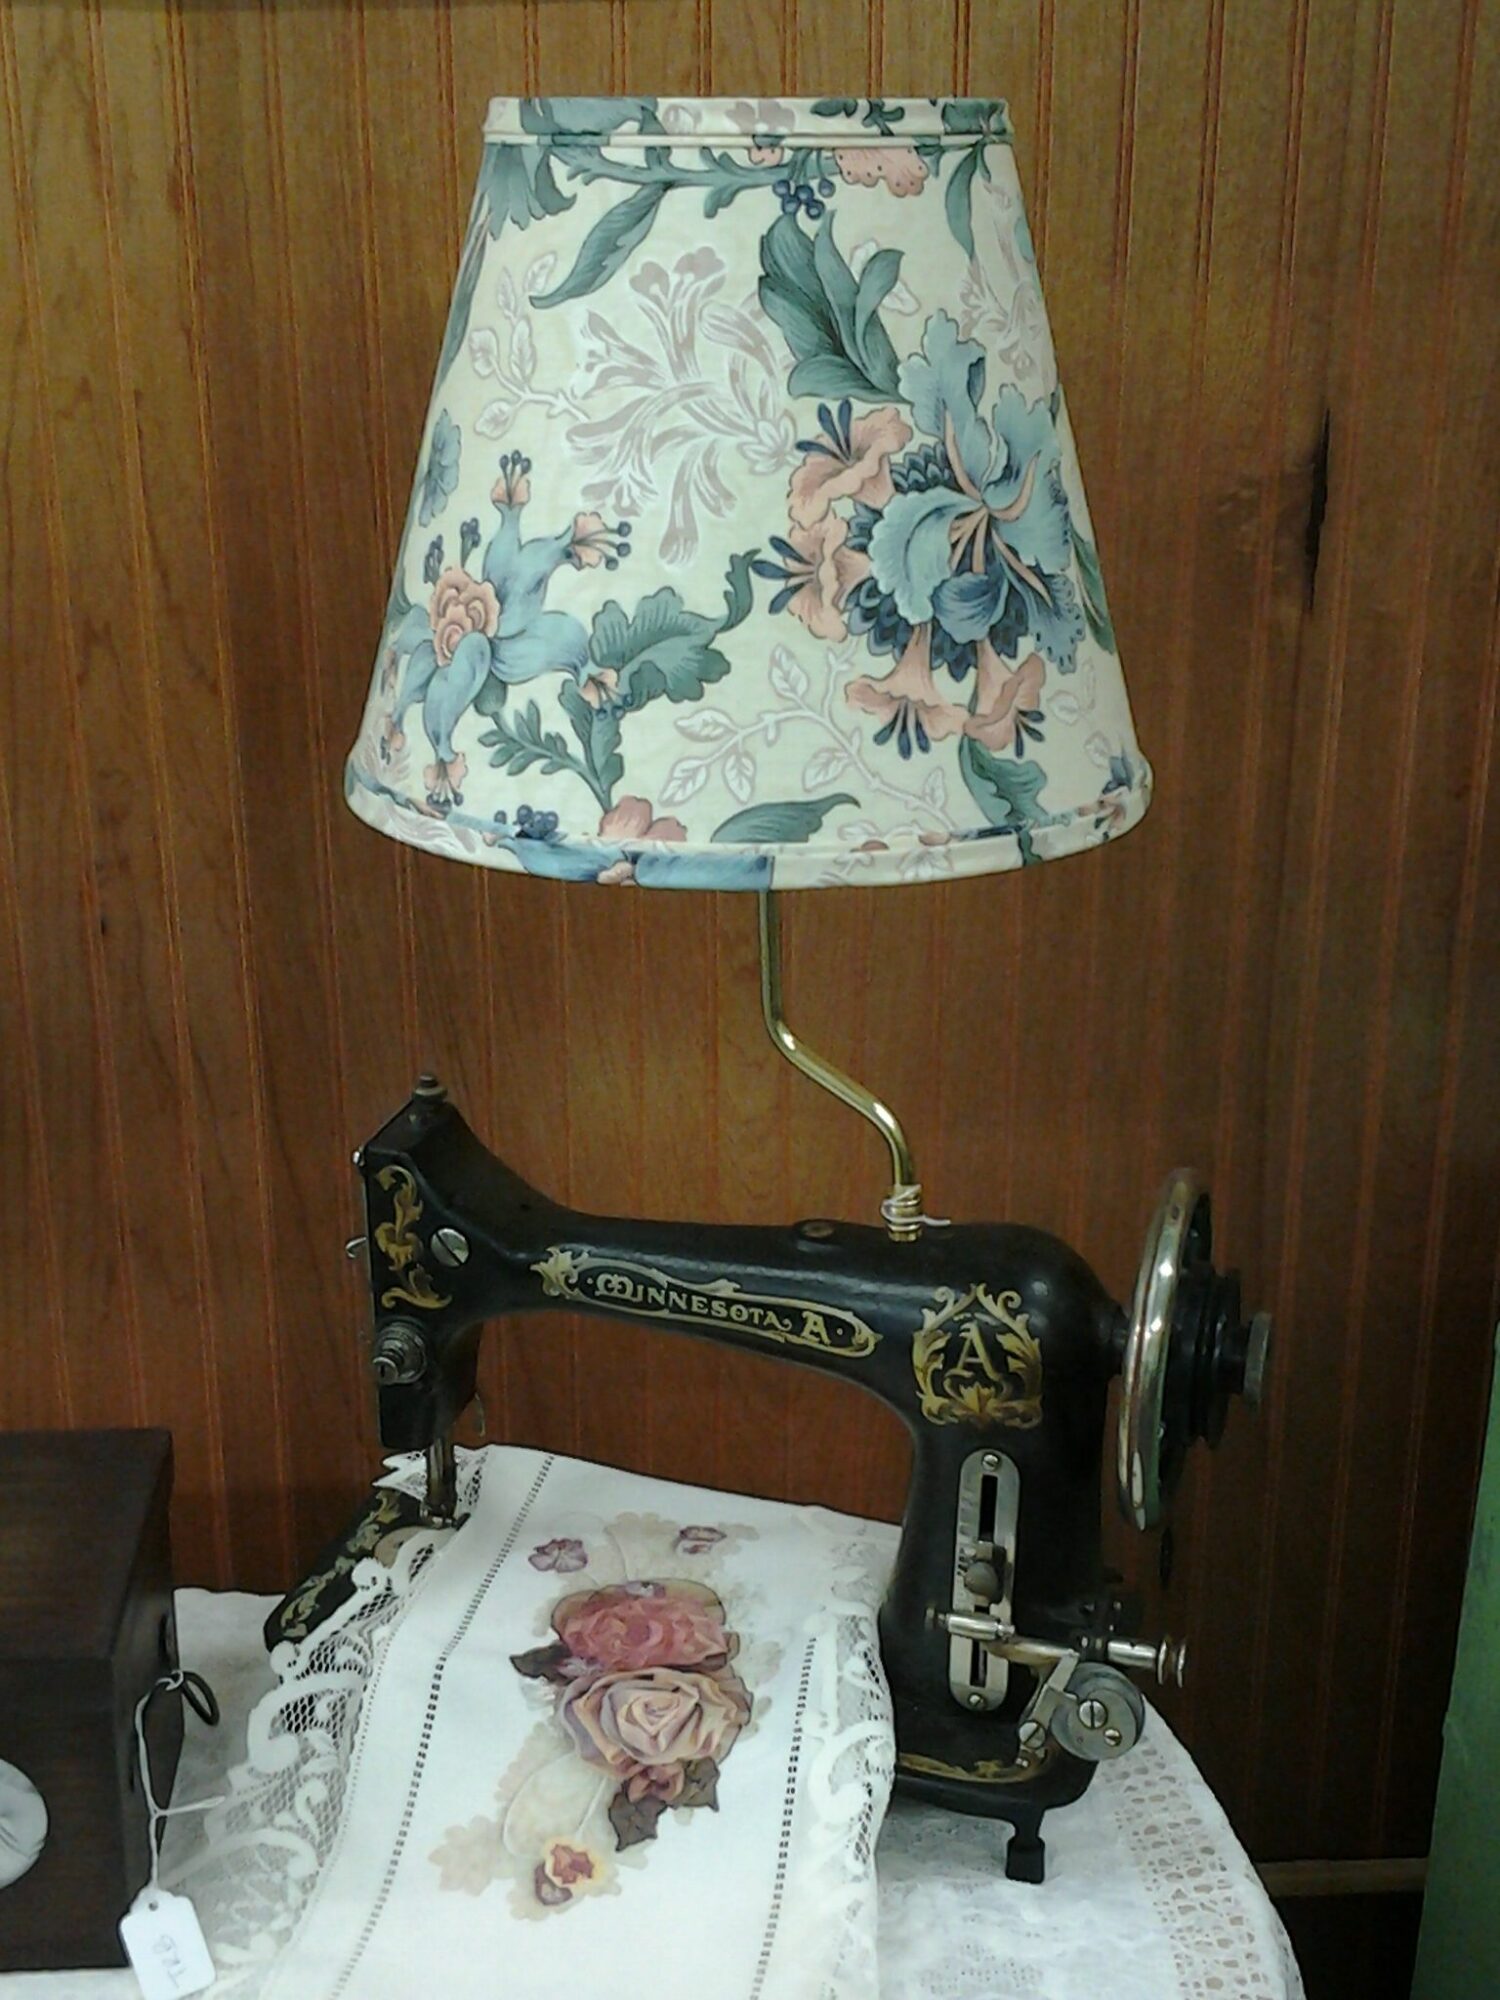 Sewing Machine Lamps - here some creative lamps made from antique sewing machines. #SewingMachines #Sewing